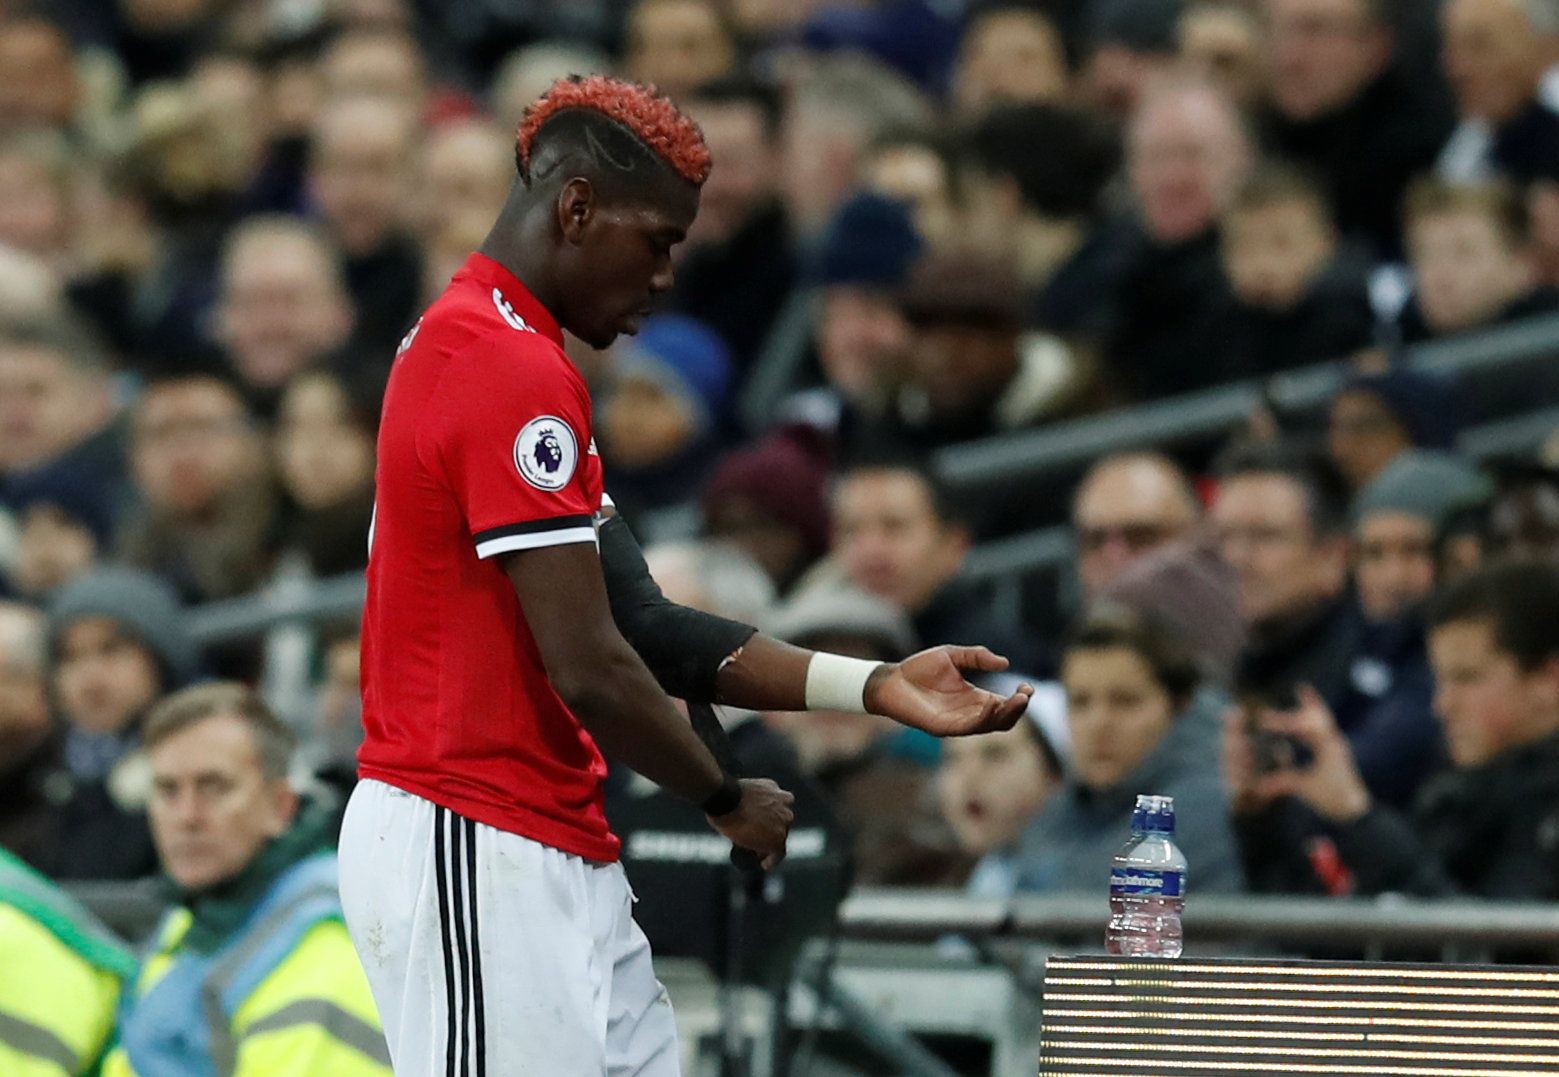 Soccer Football - Premier League - Tottenham Hotspur vs Manchester United - Wembley Stadium, London, Britain - January 31, 2018   Manchester United's Paul Pogba looks dejected as he is substituted   REUTERS/Eddie Keogh    EDITORIAL USE ONLY. No use with unauthorized audio, video, data, fixture lists, club/league logos or 